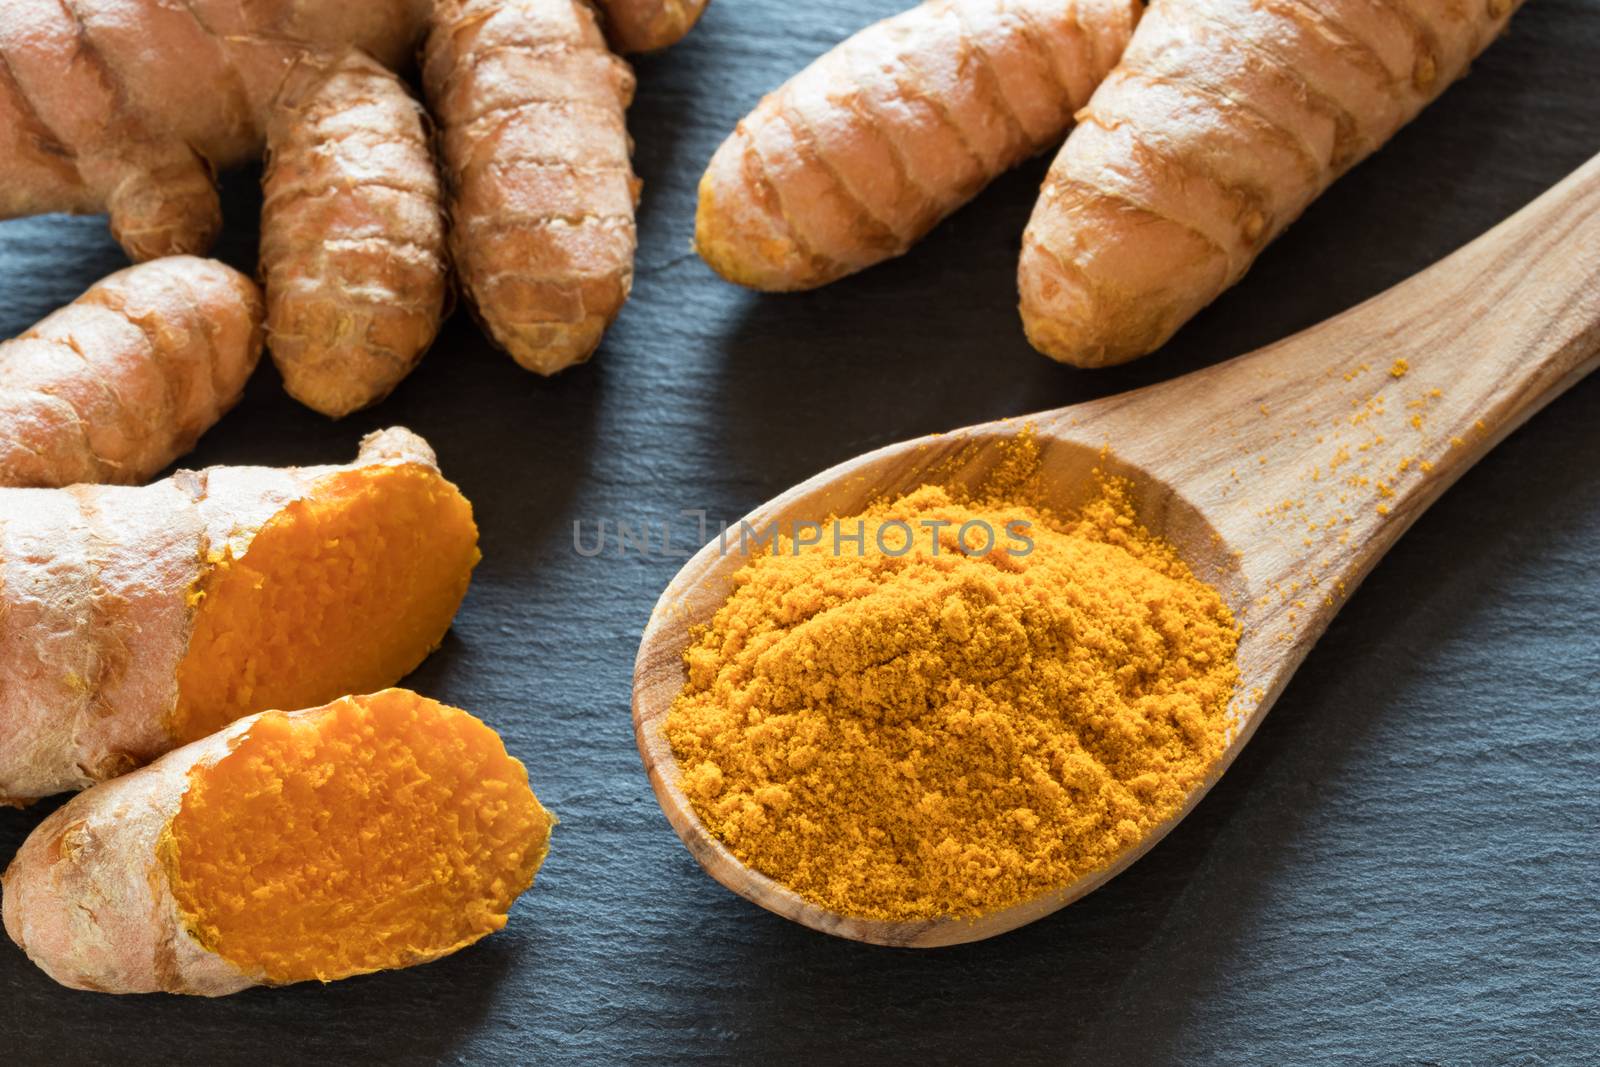 Turmeric powder on a wooden spoon, with fresh turmeric root in the background